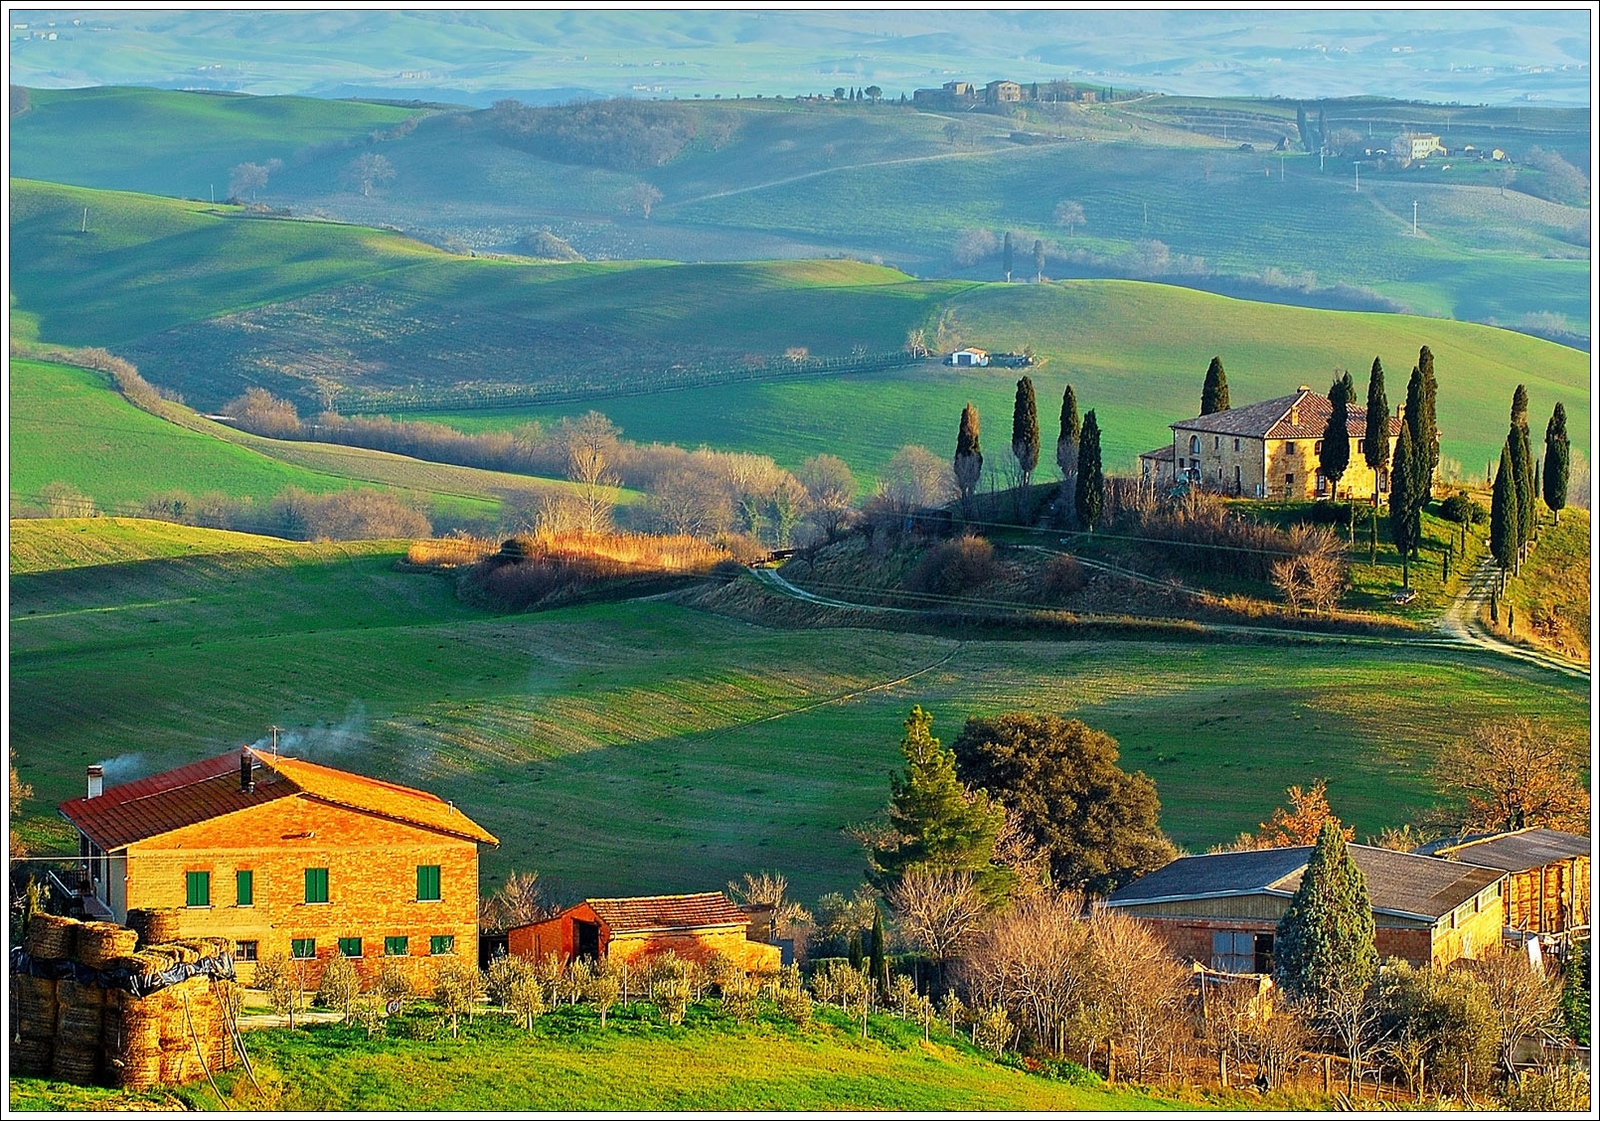 The-hill-view-of-Tuscany.jpg